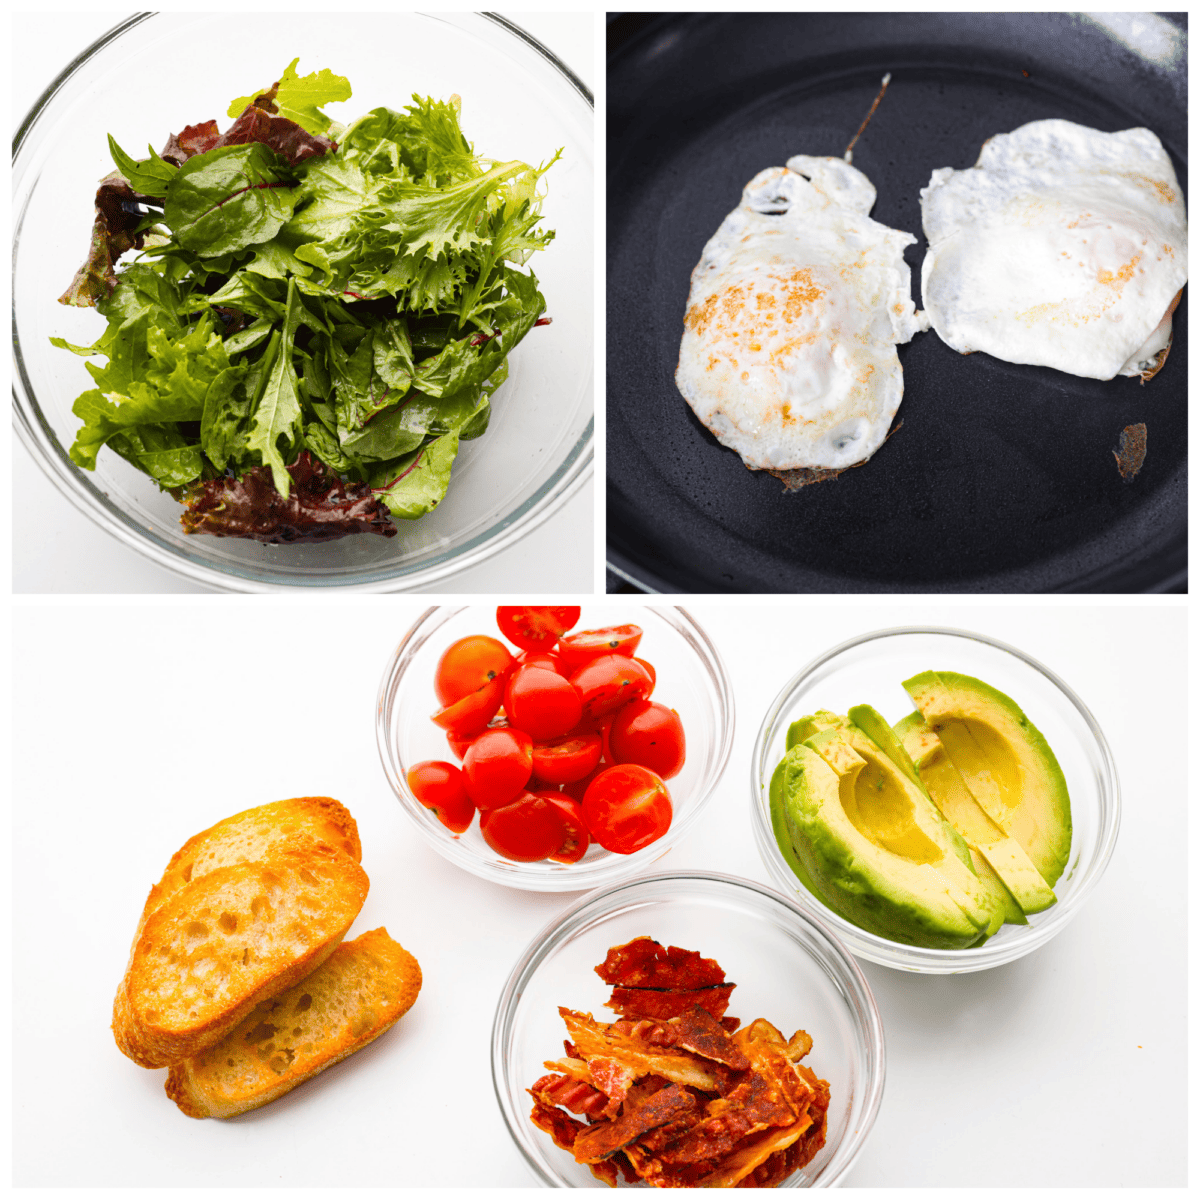 3-photo collage of salad mix-ins, a bowl of lettuce, and 2 eggs being fried.